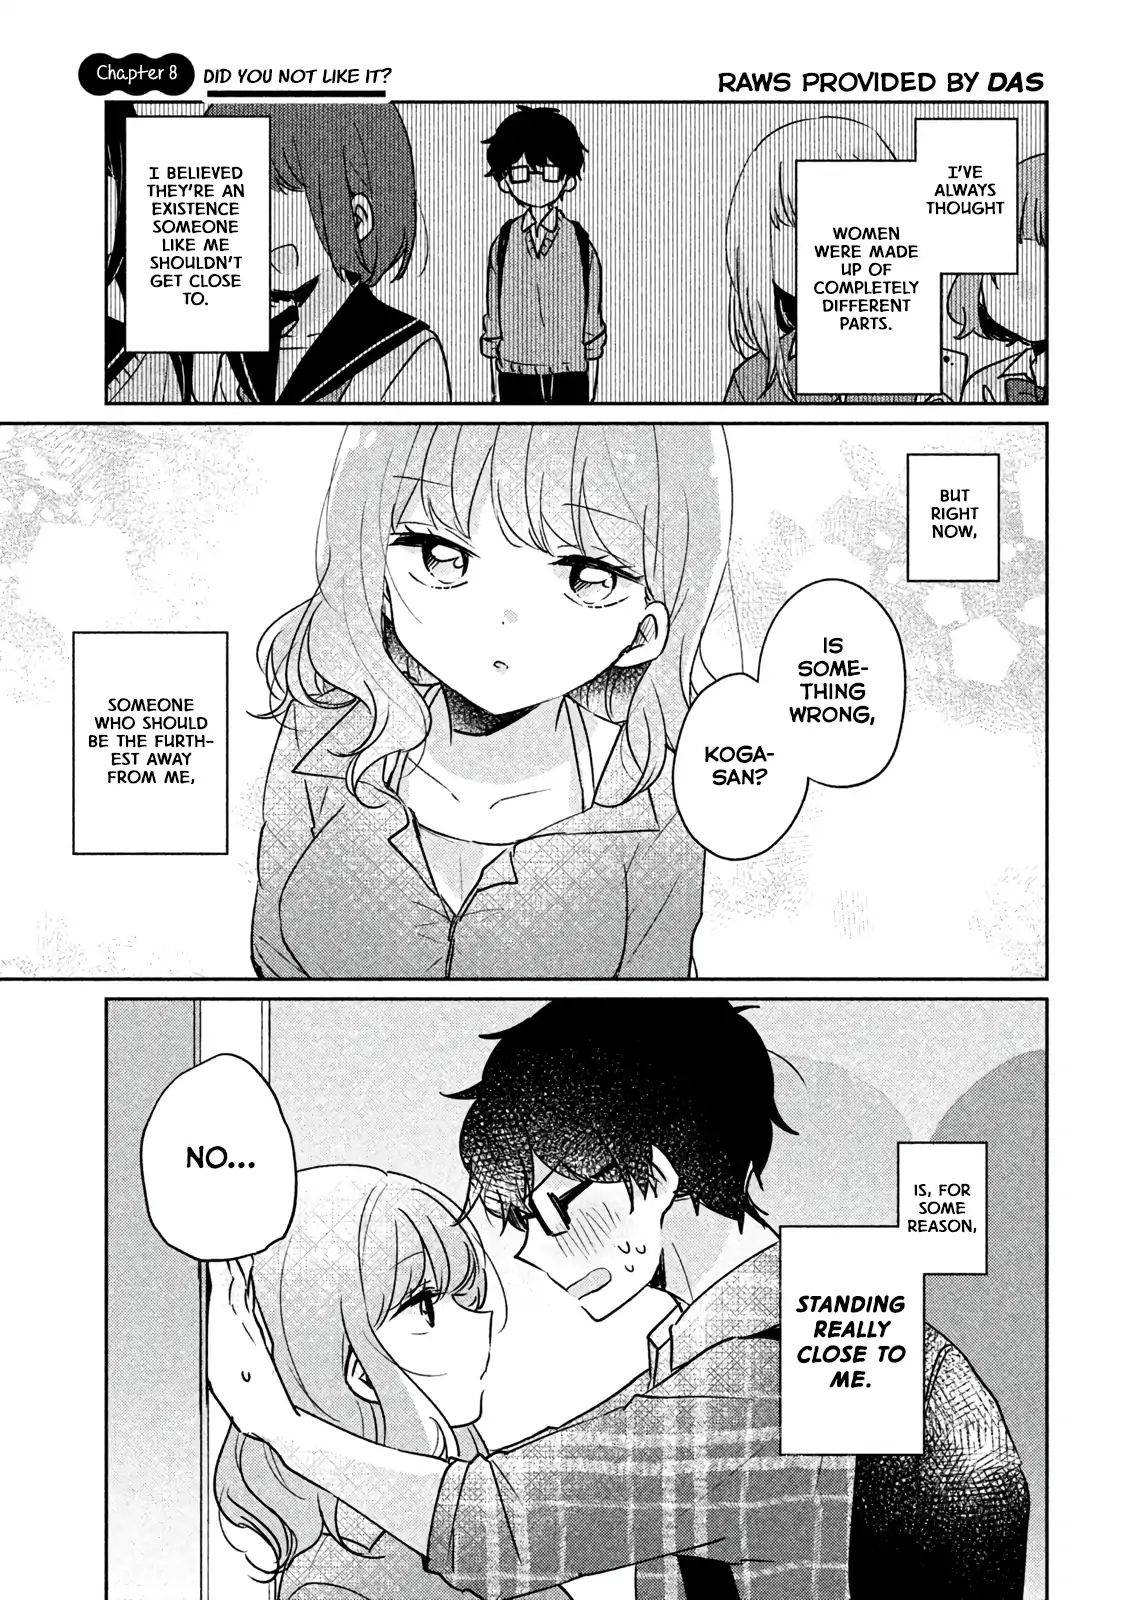 It's Not Meguro-San's First Time - Page 1